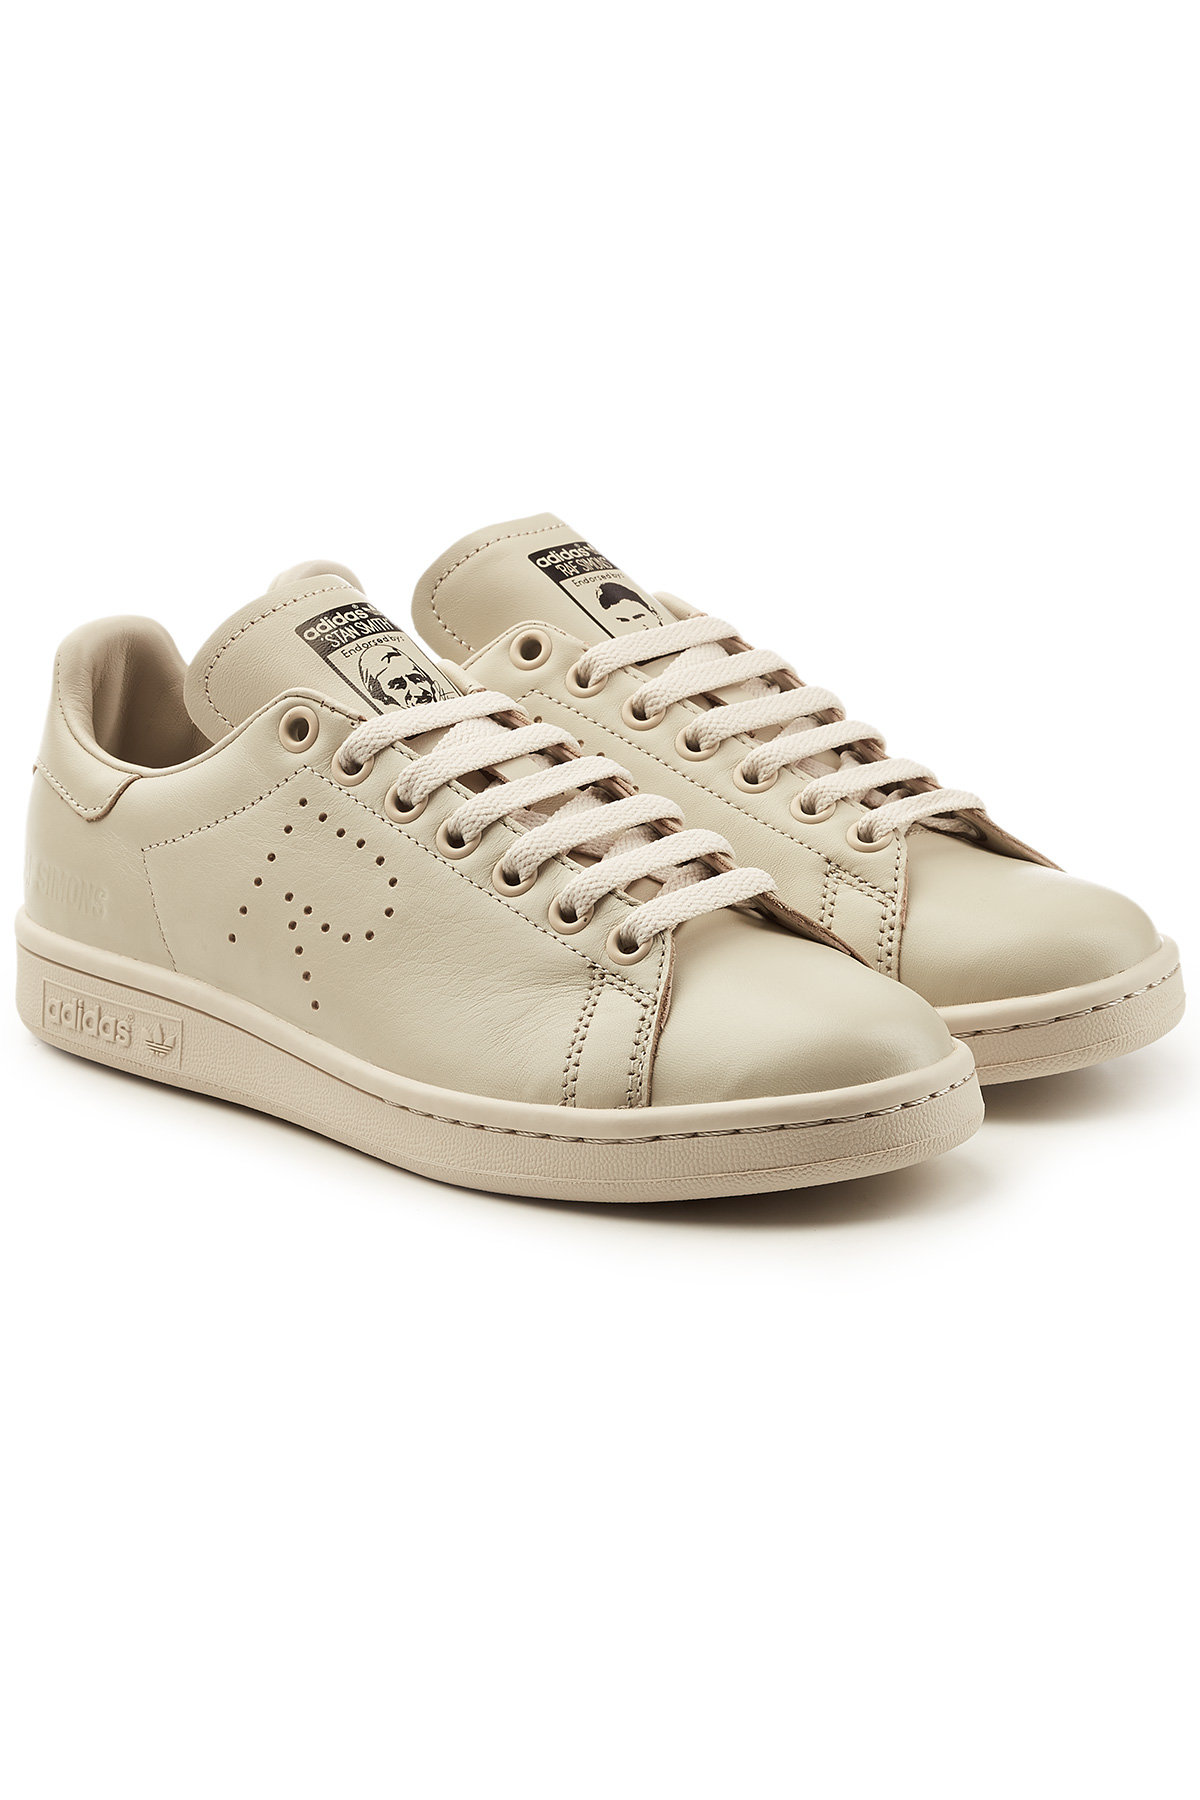 RS Stan Smith Leather Sneakers by Adidas by Raf Simons